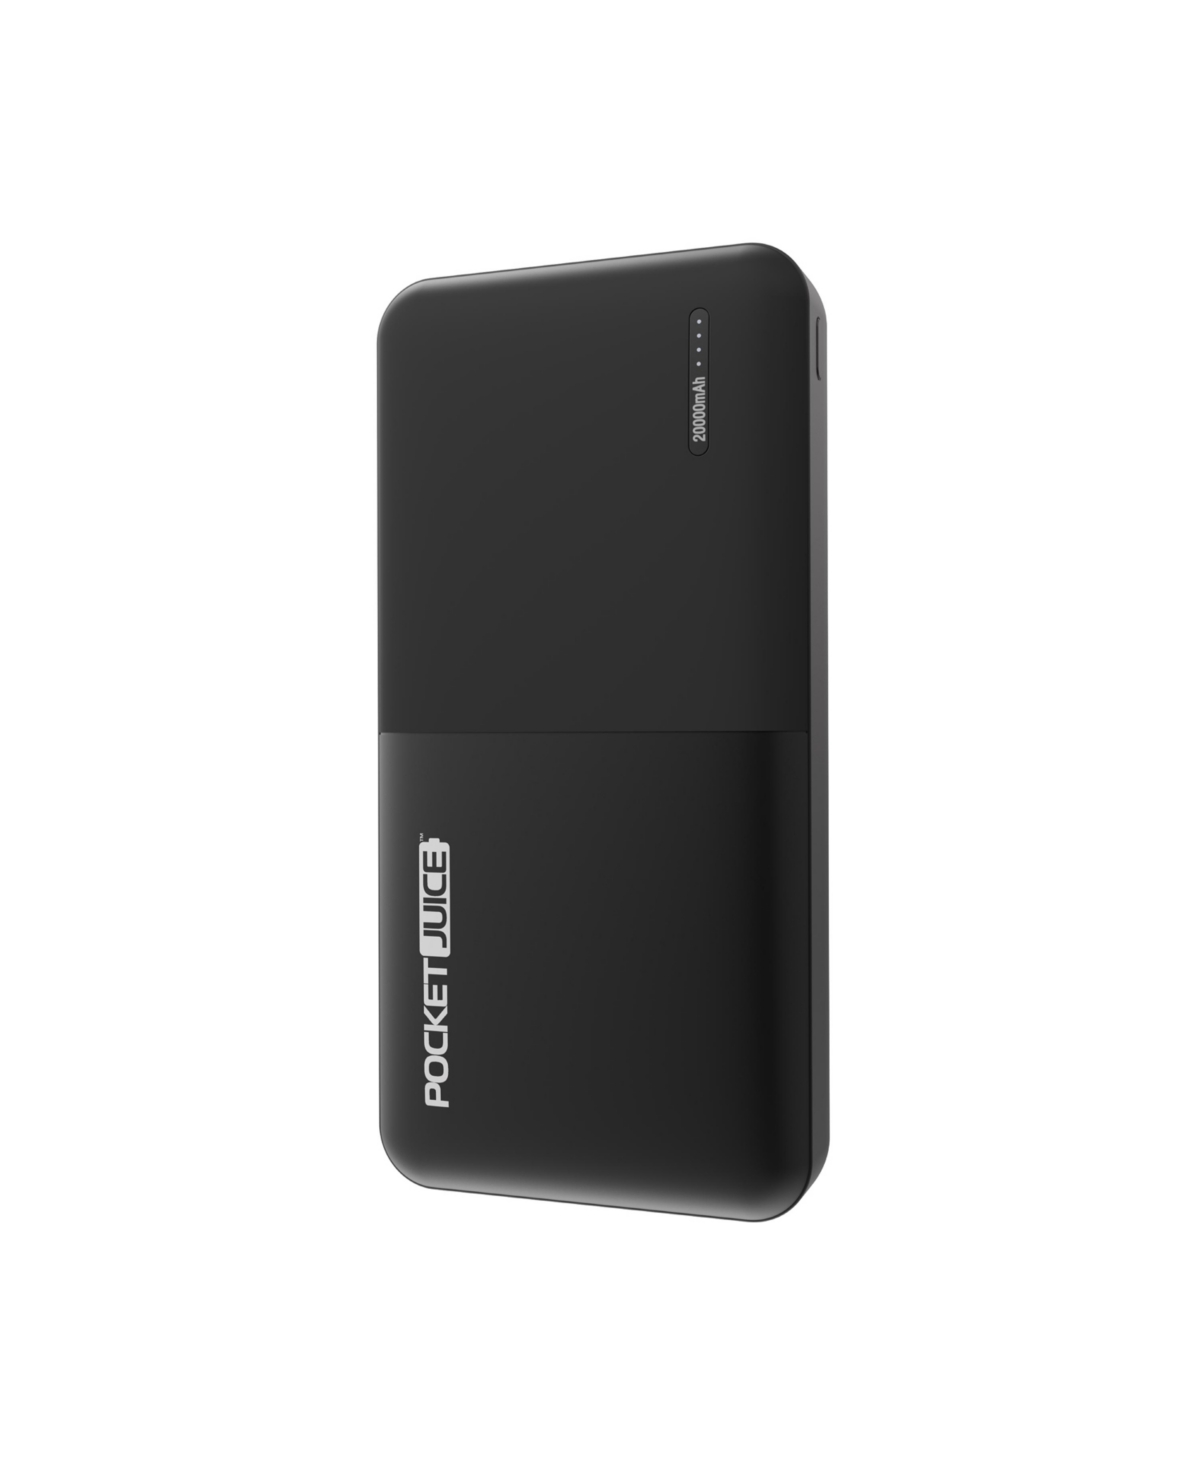 Tzumi Pocket Juice Slim Pro 20k Mah Portable Power Bank And Charger In Black